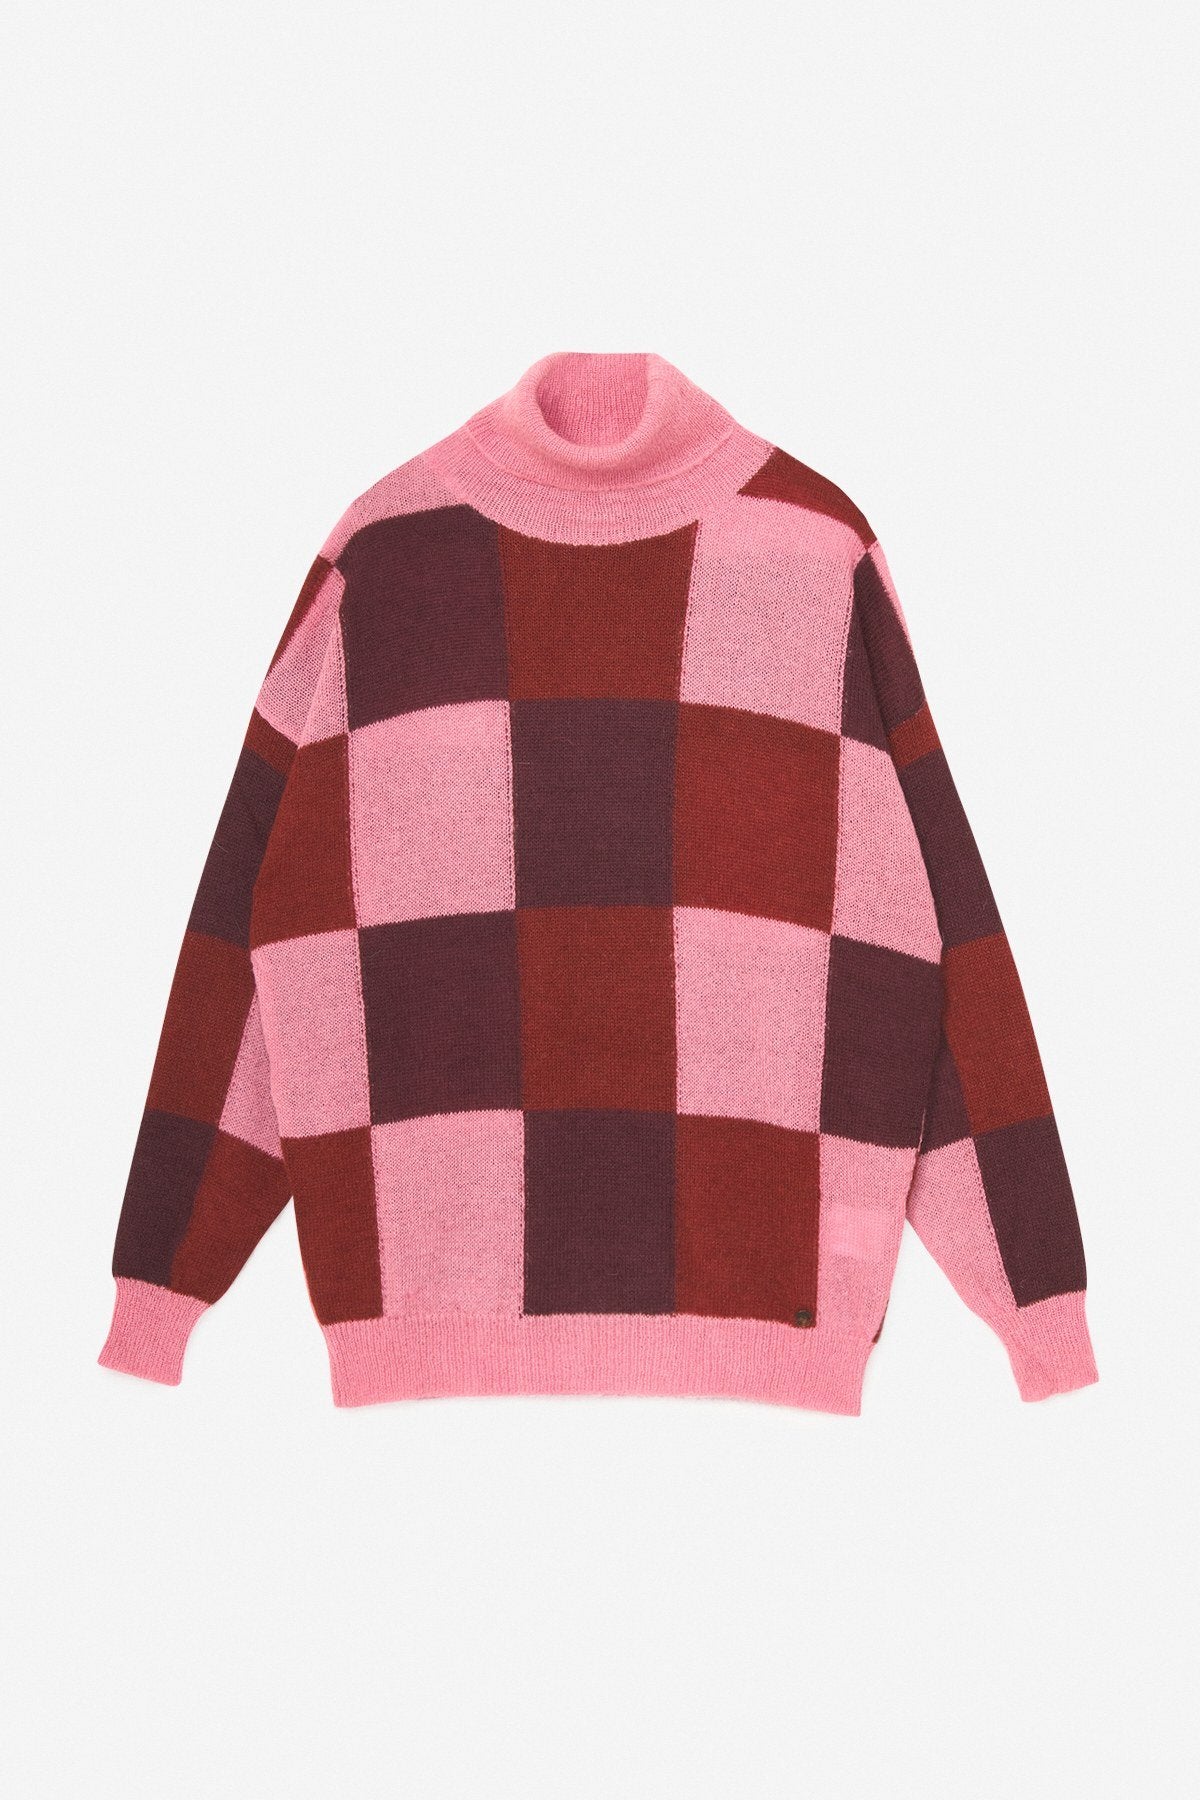 Ottod'ame - Checkered Sweater: Pink